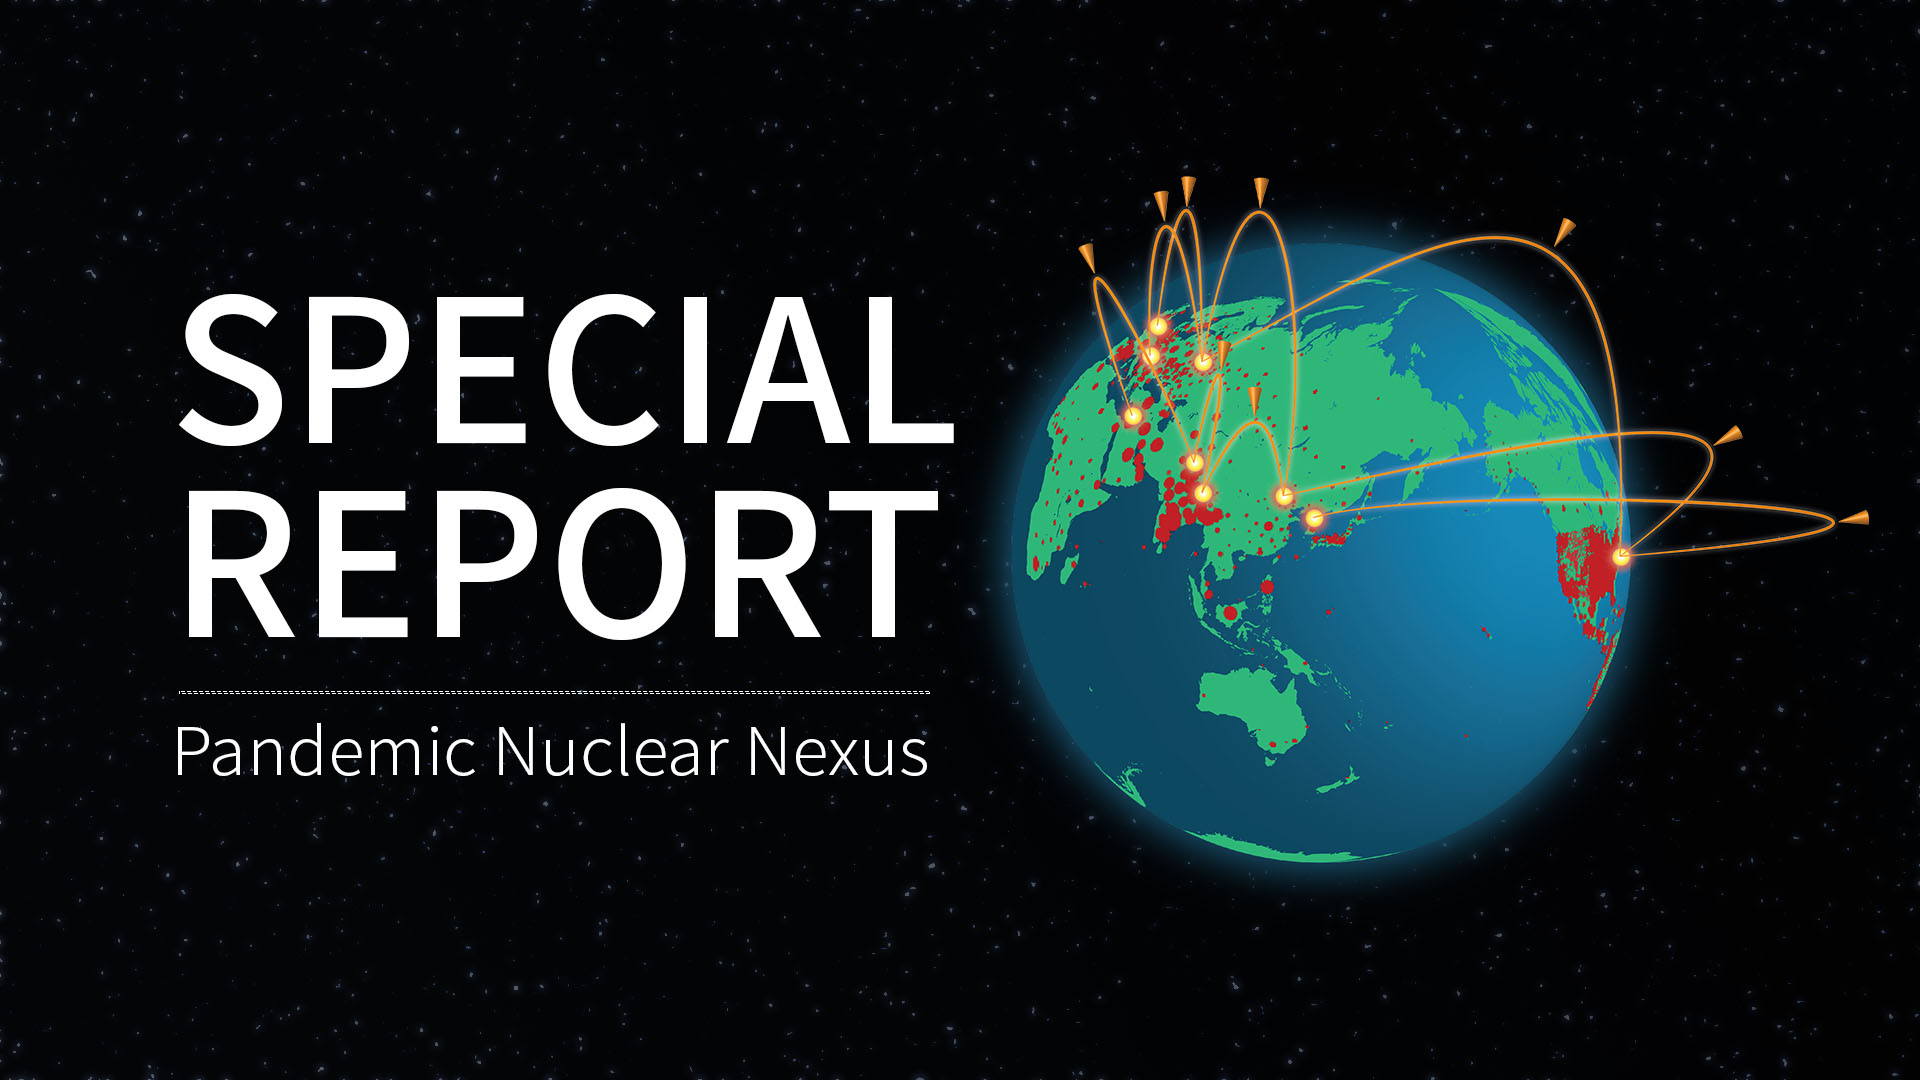 SPECIAL REPORT: Assessing the modernization of nuclear postures